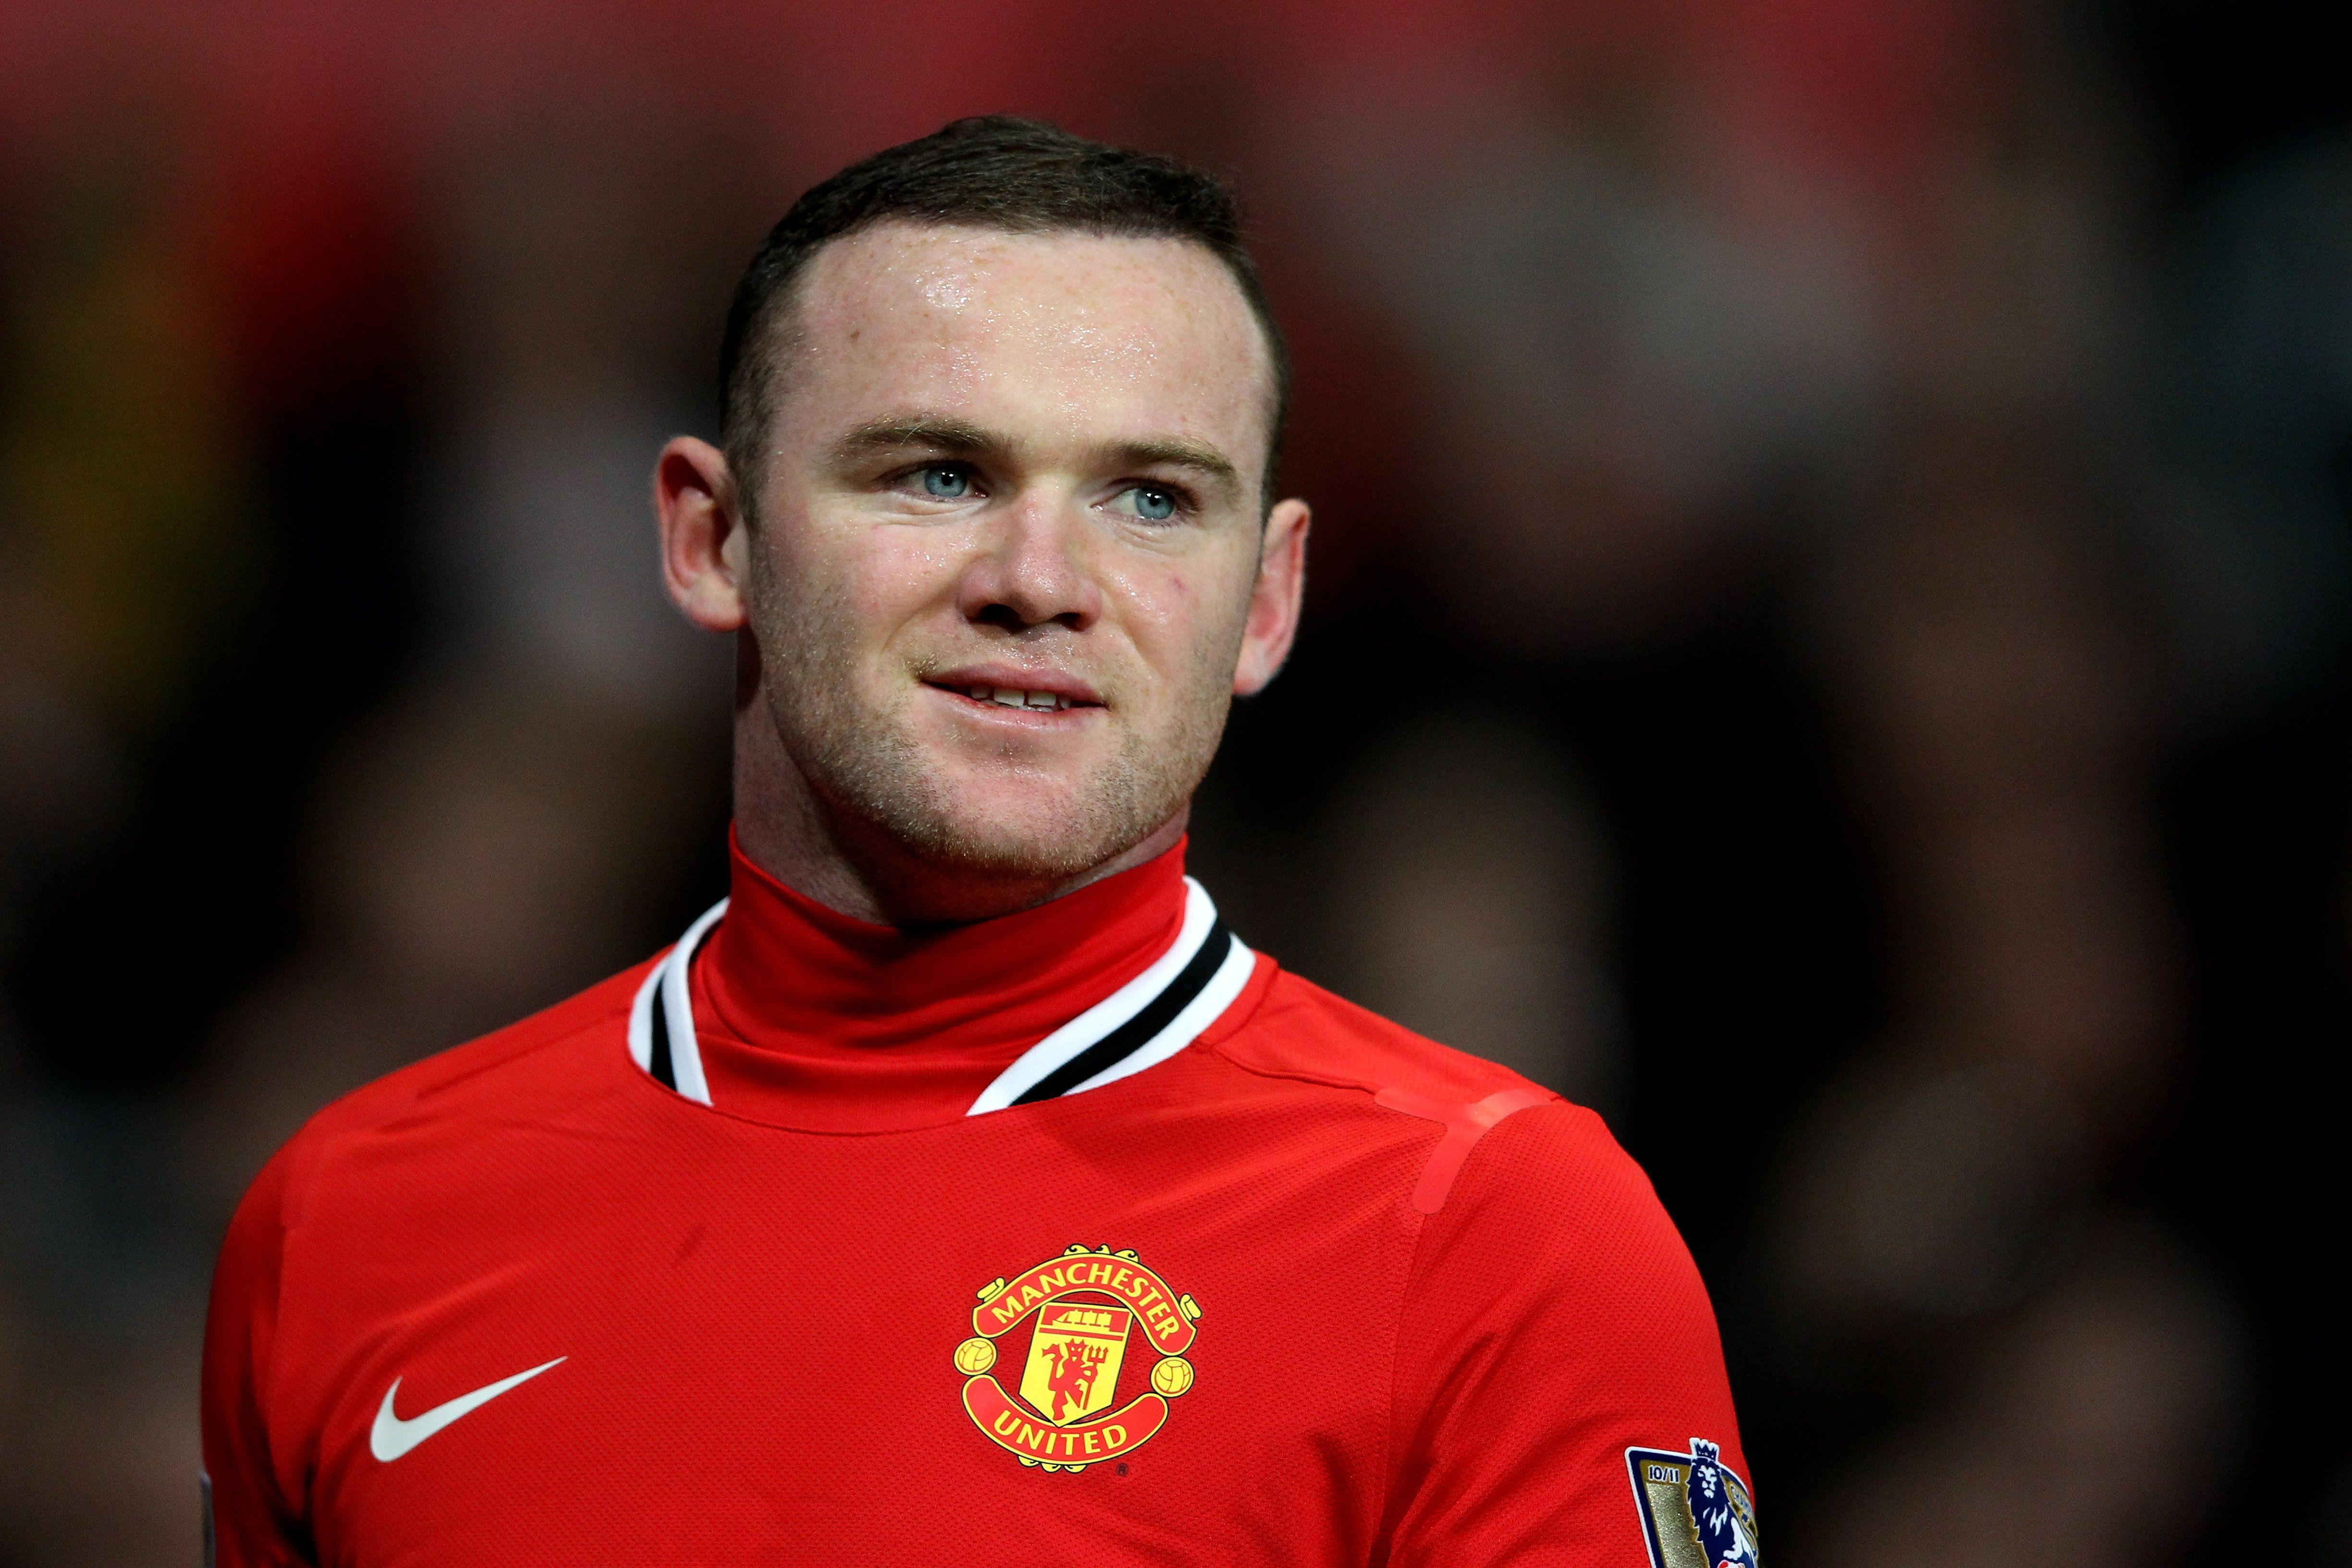 Wayne Rooney Wallpaper High Resolution and Quality Download